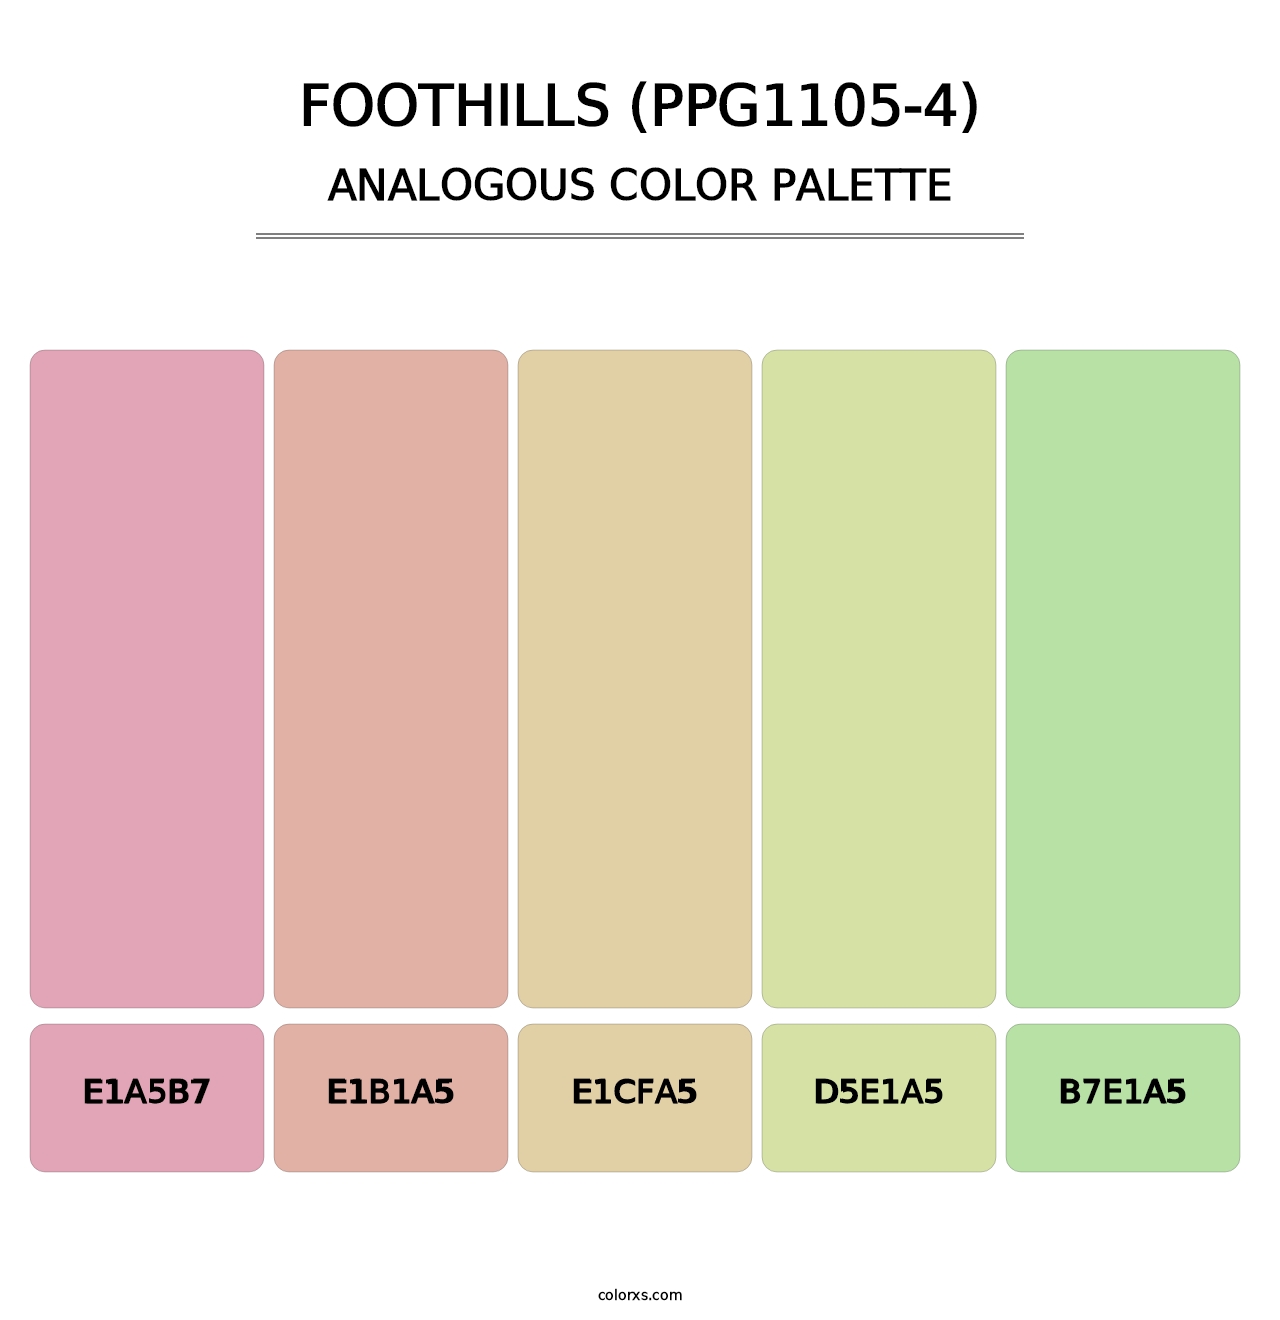 Foothills (PPG1105-4) - Analogous Color Palette